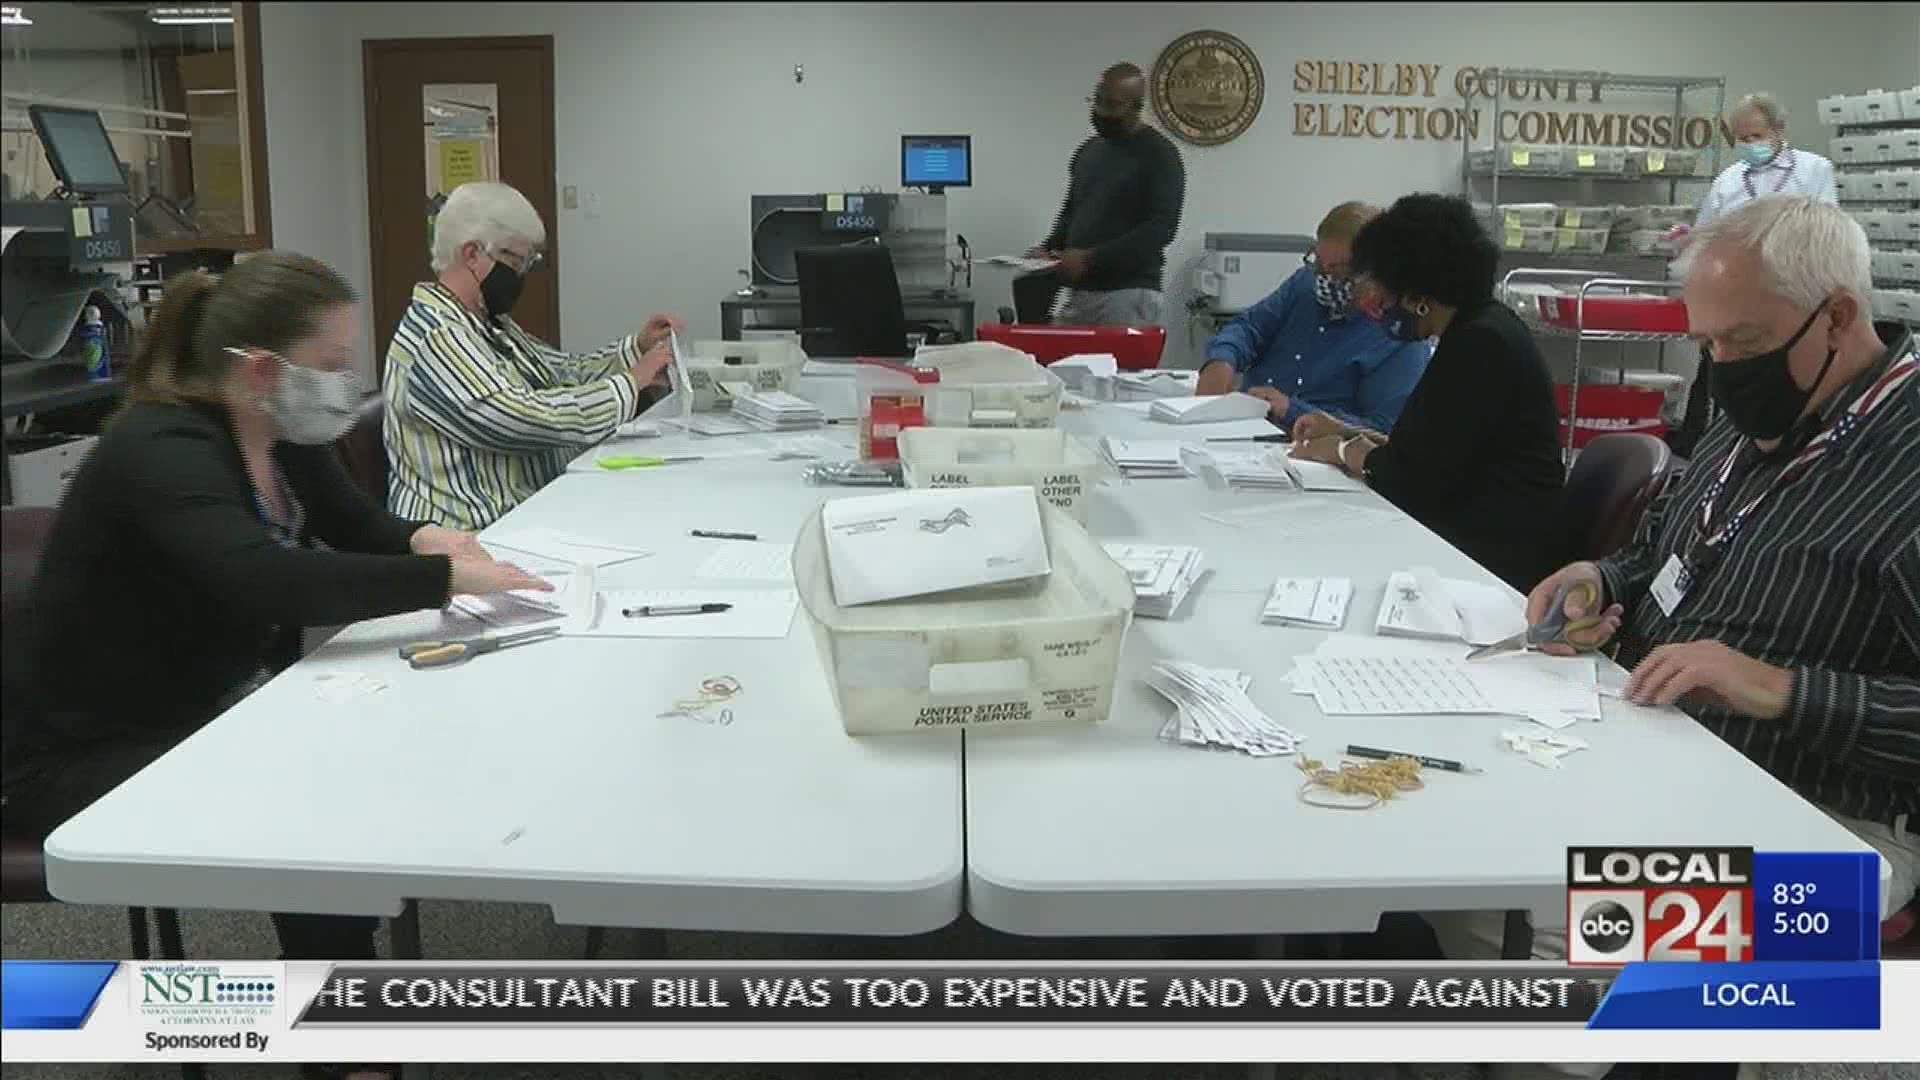 Around 5,000 such ballots went out Wednesday, tens of thousands additional requests expected in coming weeks.